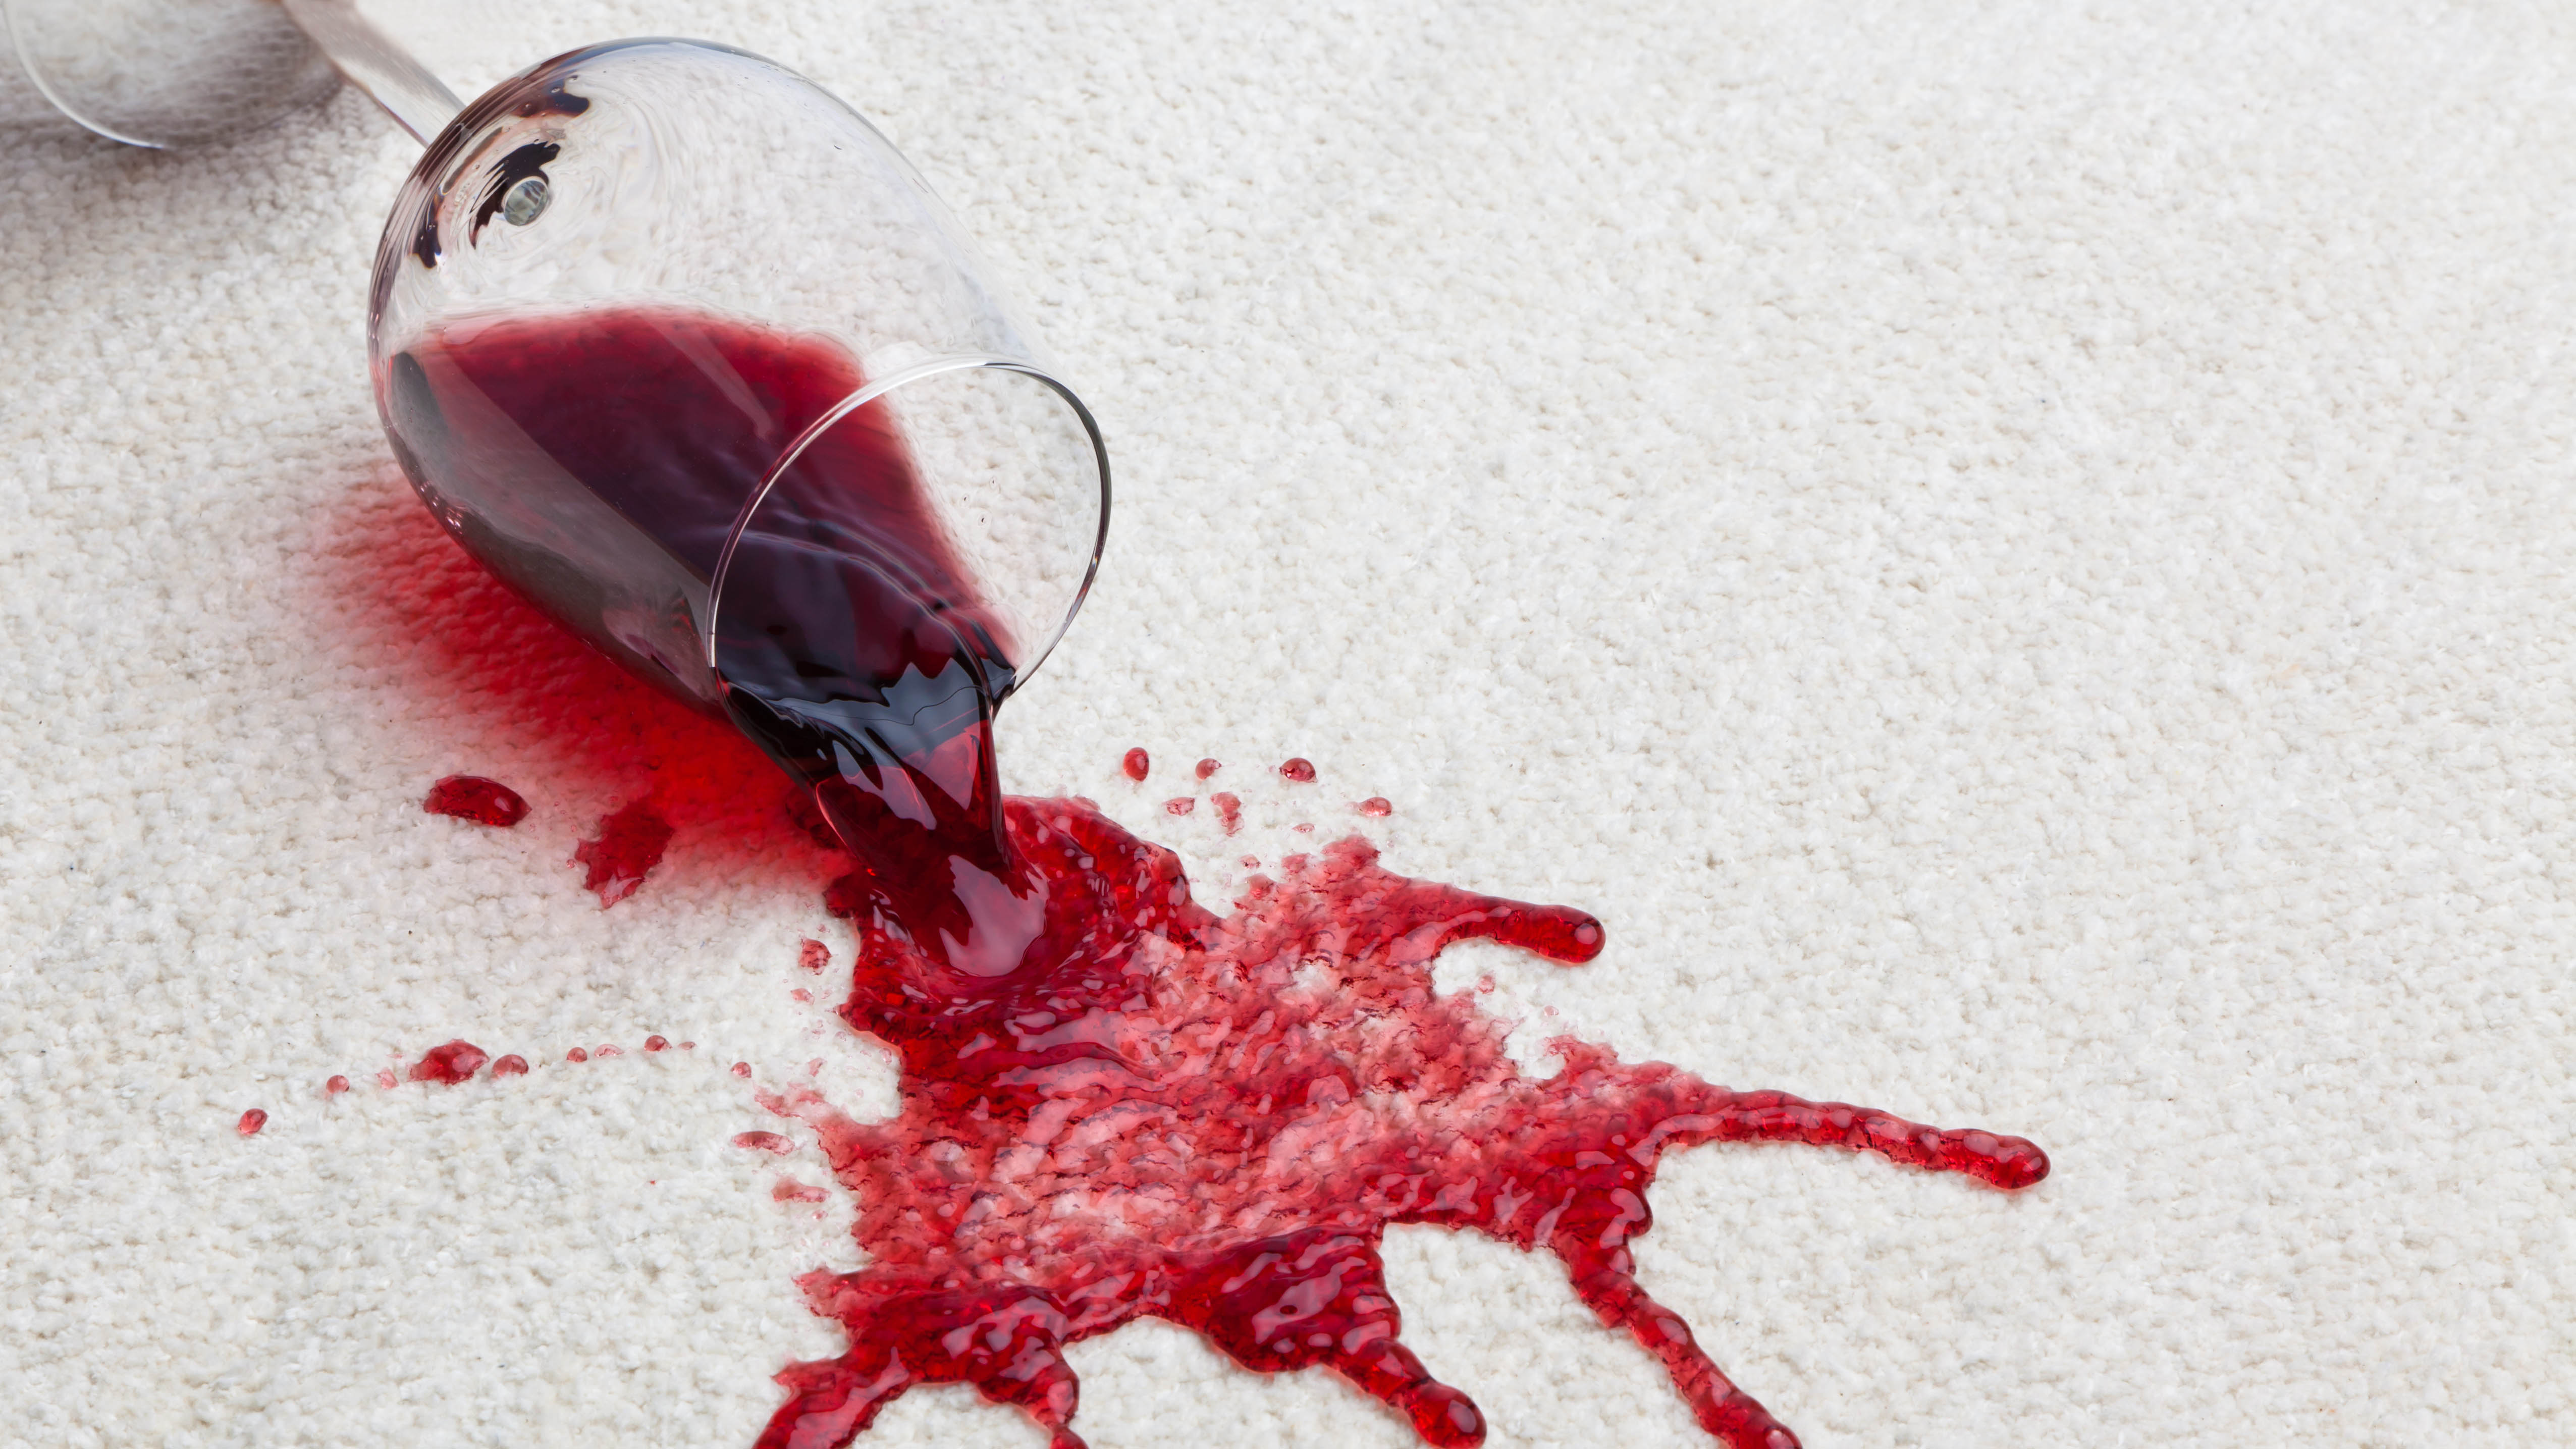 Red wine spilled on the carpet